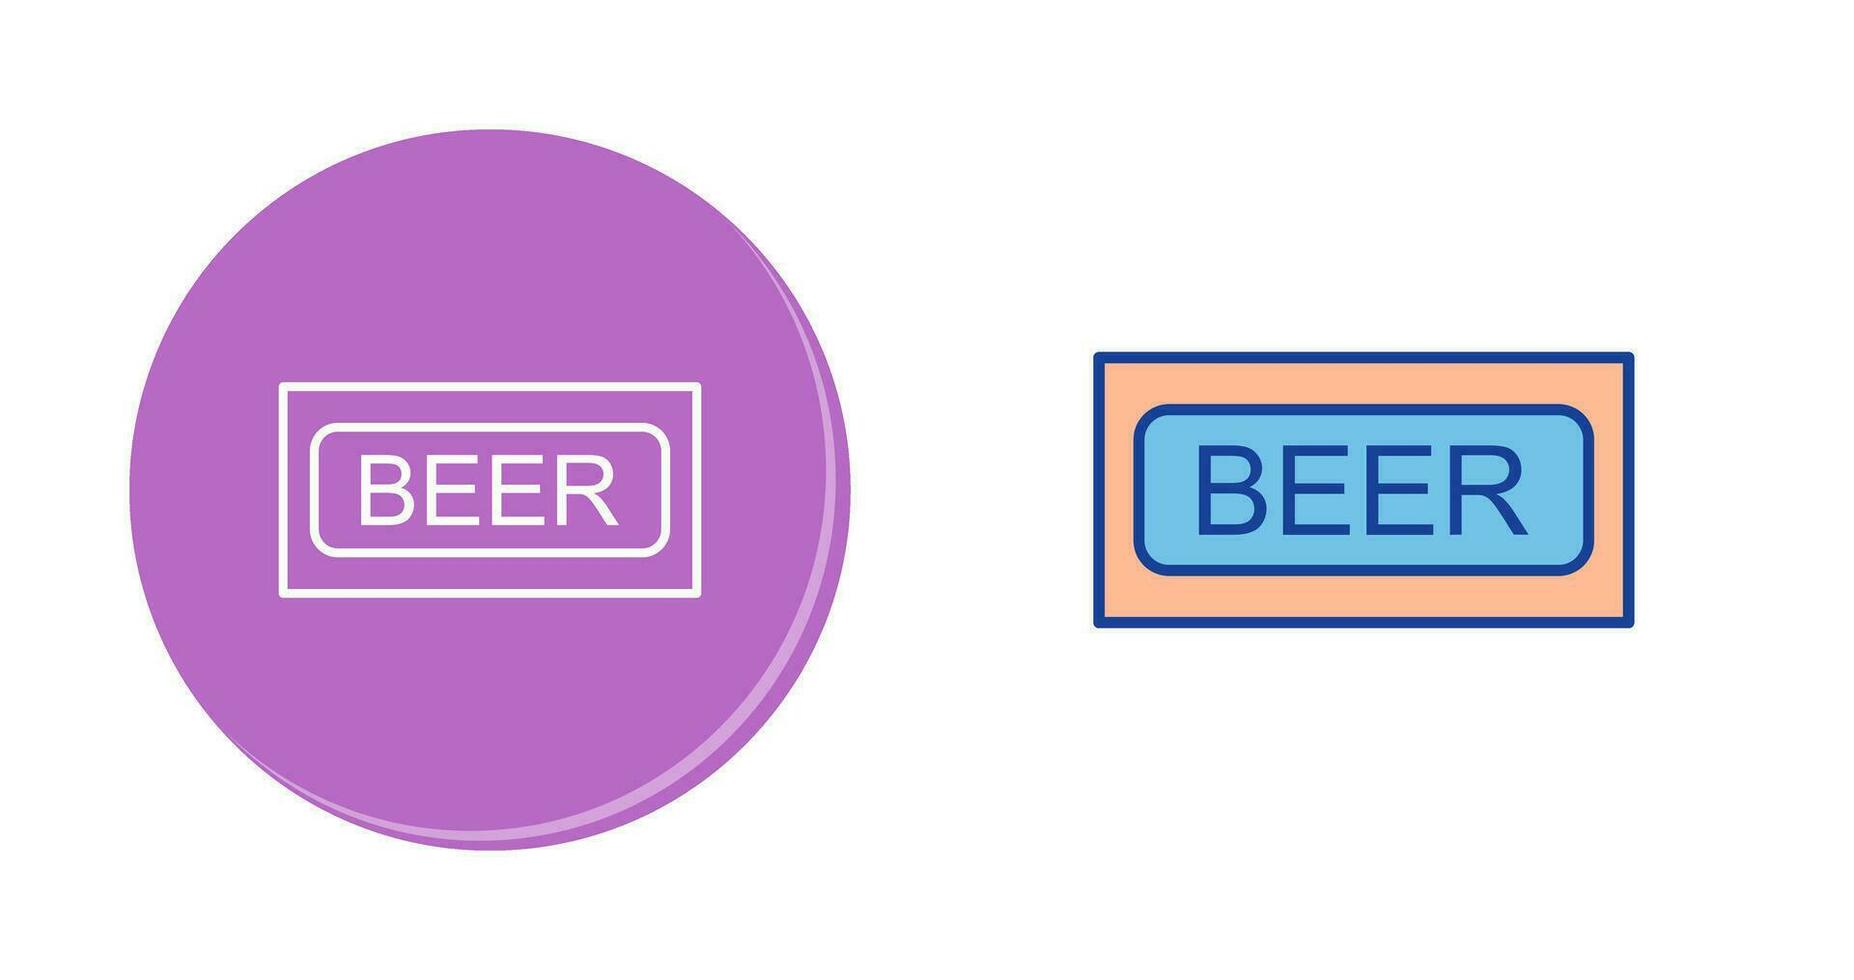 Beer Sign Vector Icon